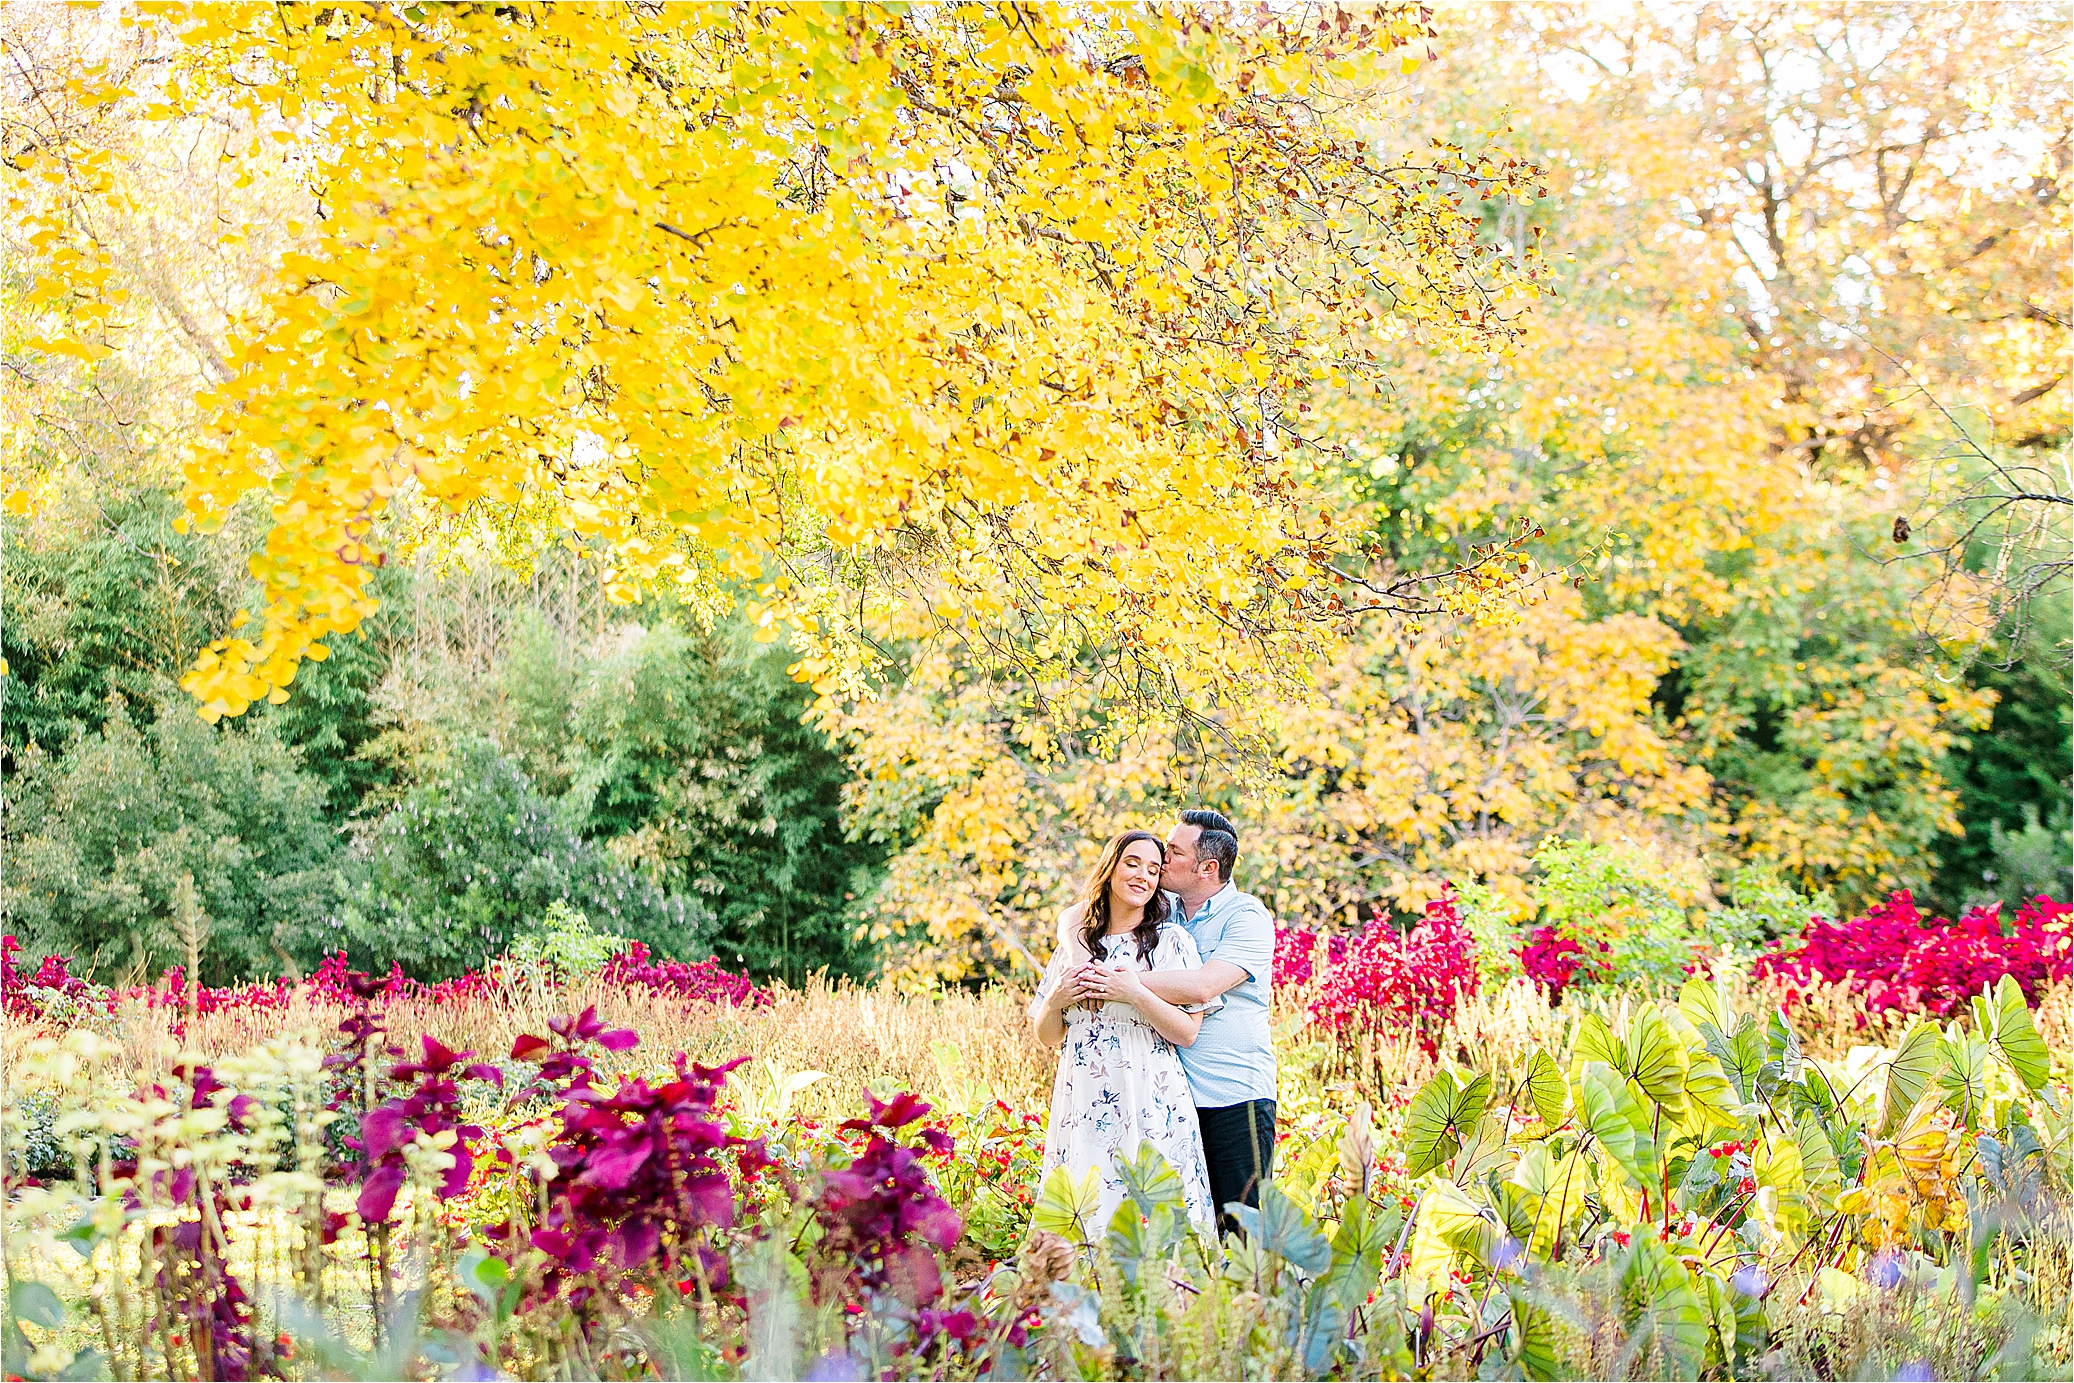 An engaged couple embraces under a tree with yellow leaves and among a field of red flowers on a warm, sunny day during their DFW Engagement Session at The Fort Worth Botanic Garden 